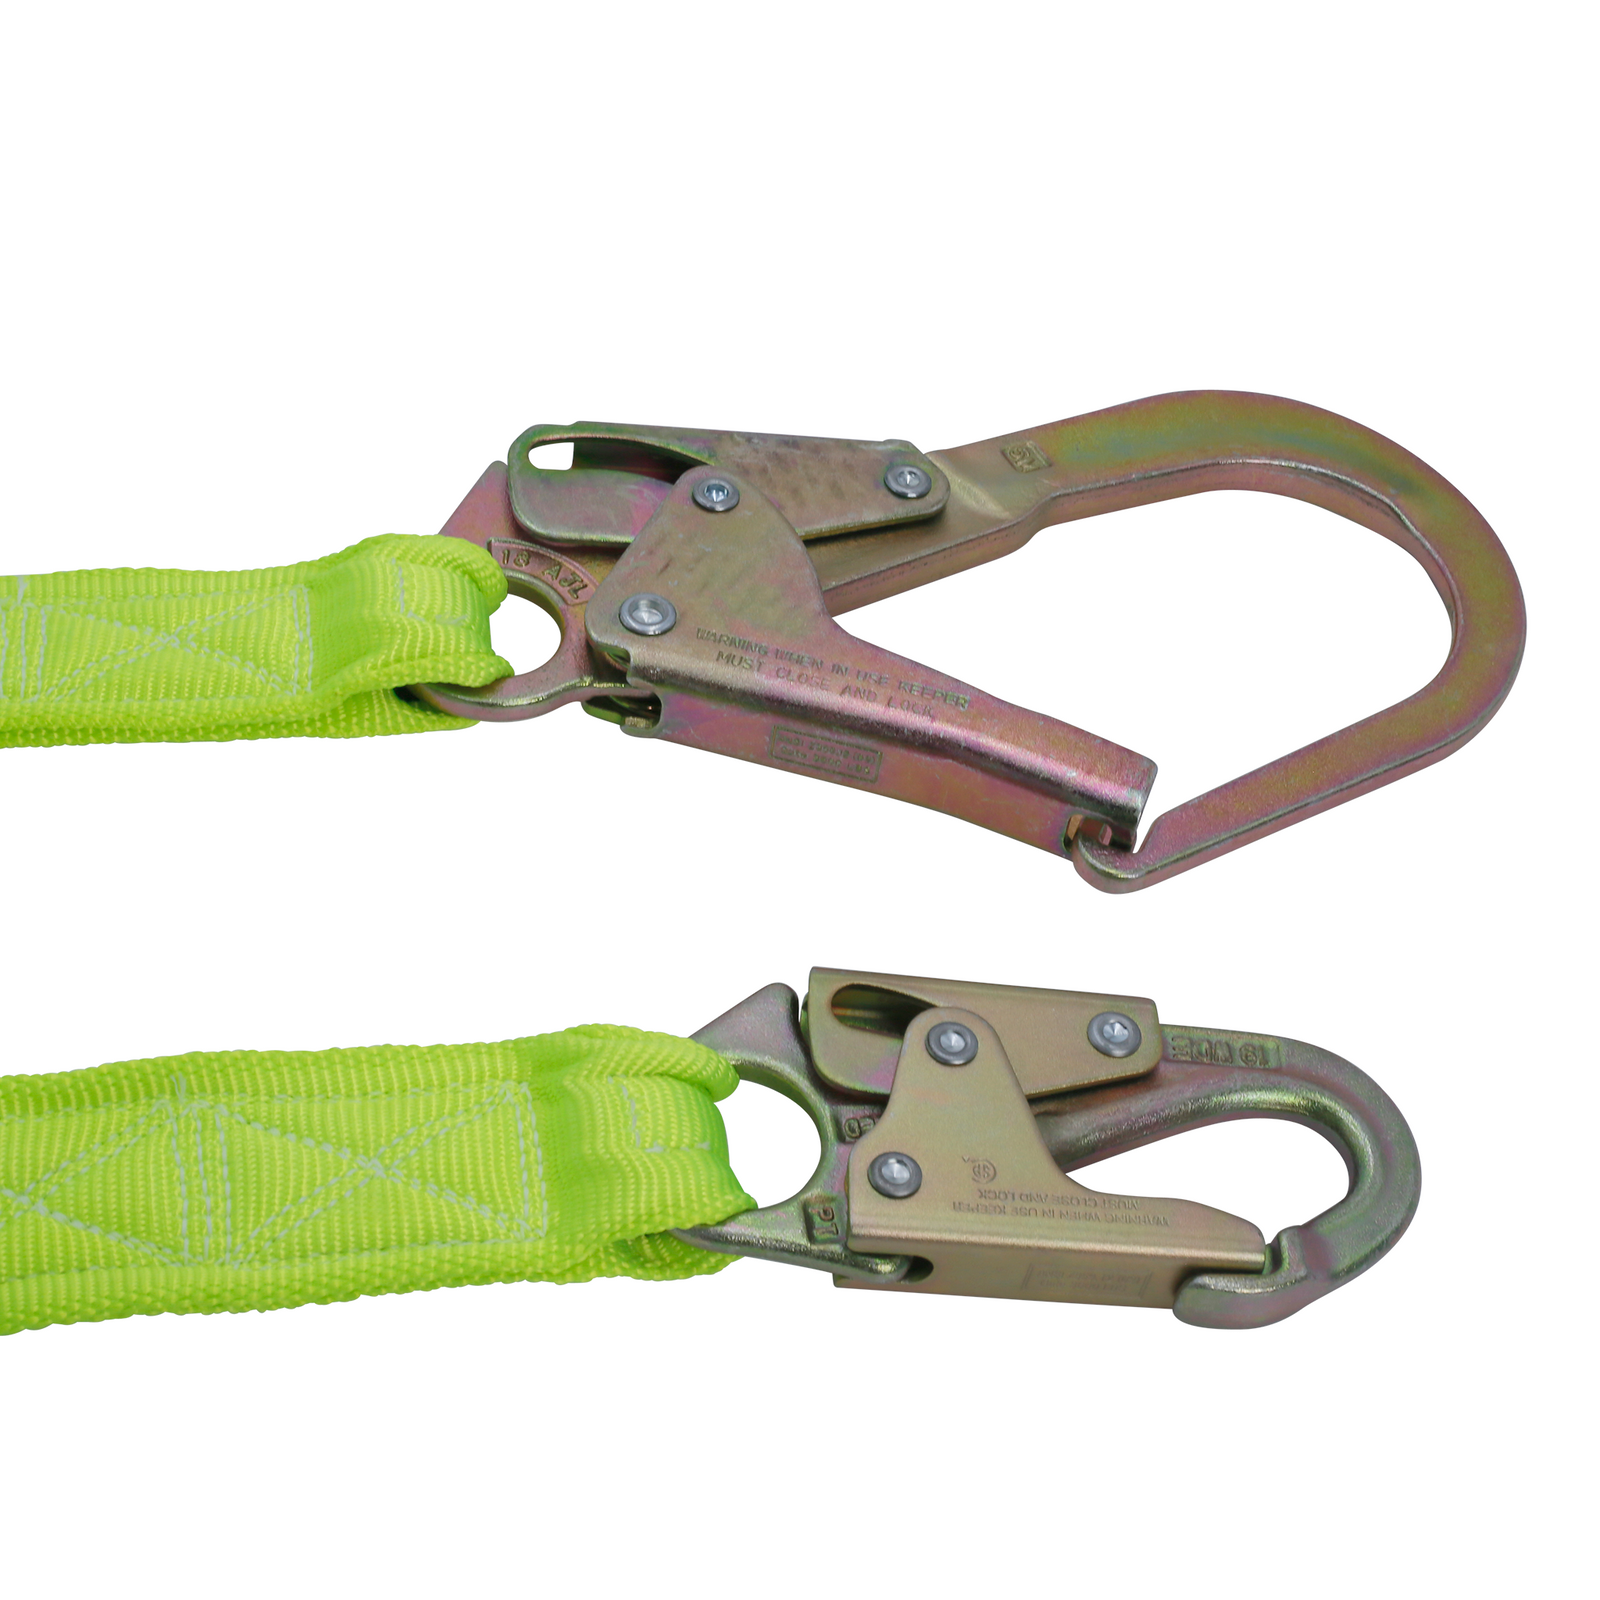 Features the metal snap hooks and the scaffolding hook of the JORESTECH single leg lanyard